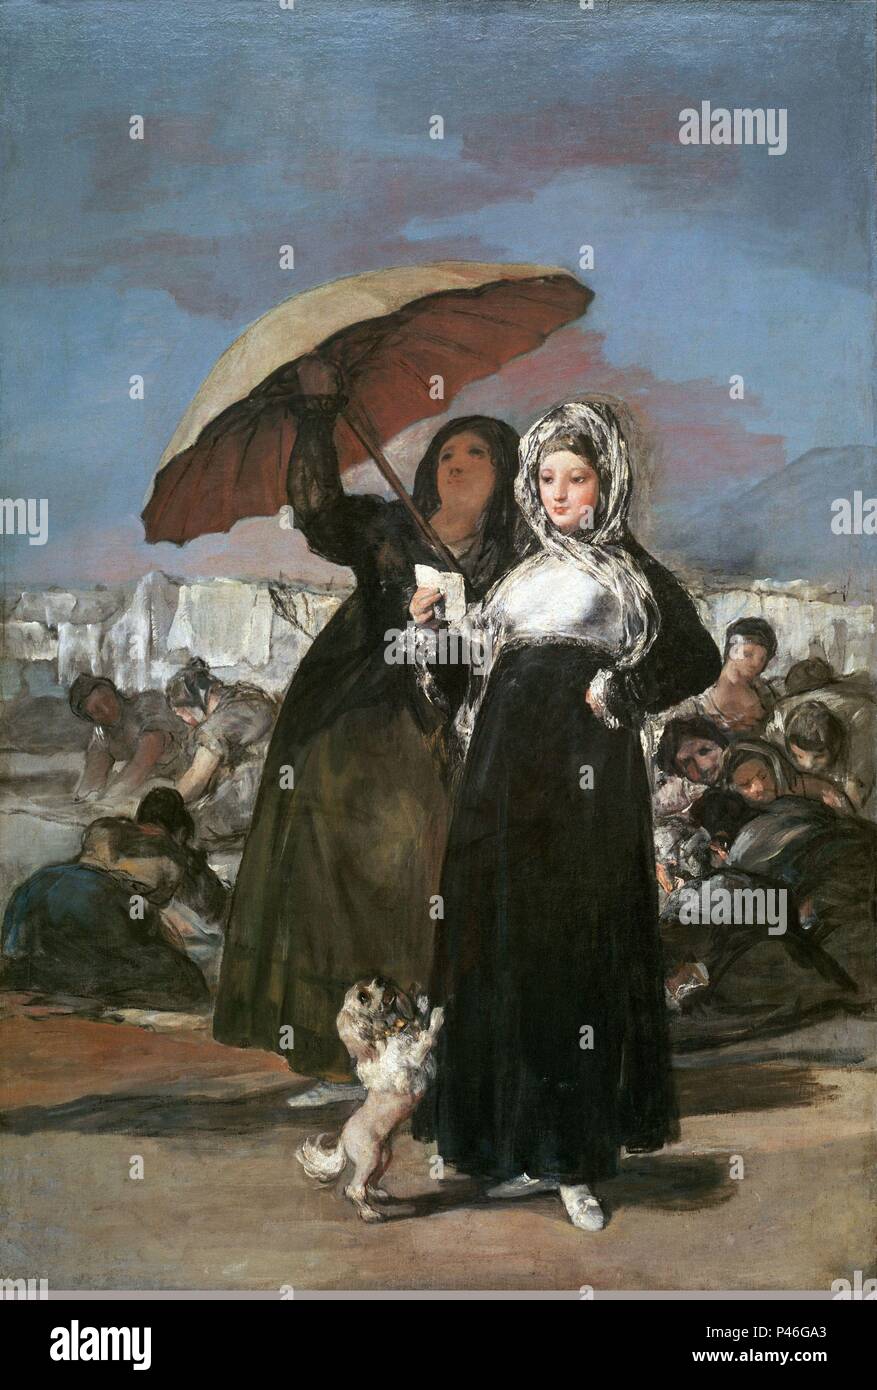 The Letter or The Young Women - ca. 1814/19 - 181x125 cm - oil on canvas. Author: Francisco de Goya (1746-1828). Location: MUSEO, LILLE, FRANCE. Also known as: JOVENES LEYENDO UNA CARTA. Stock Photo